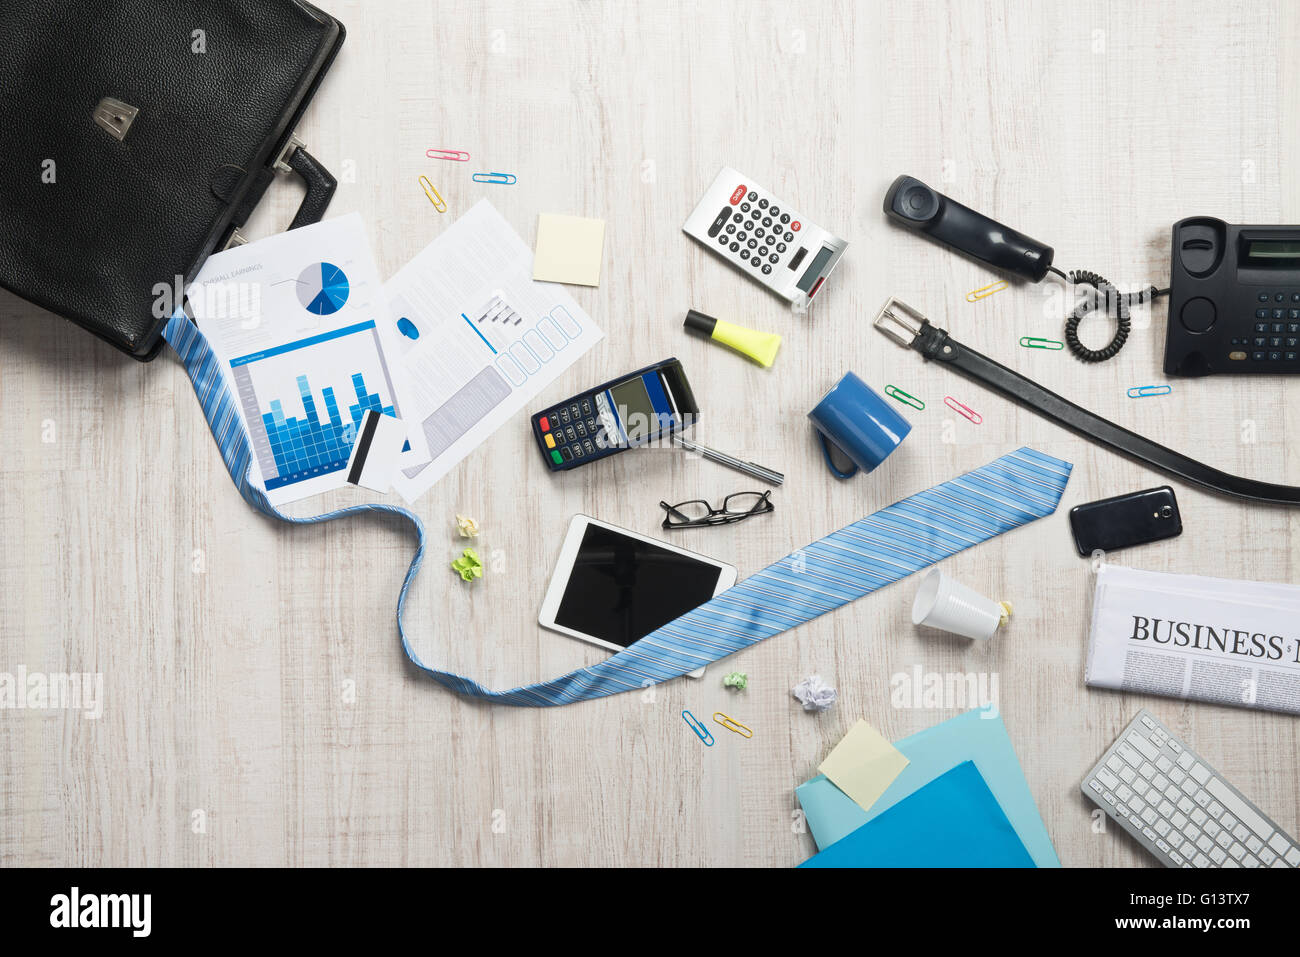 Men`s Collection of daily Use Business Accessories Stock Image